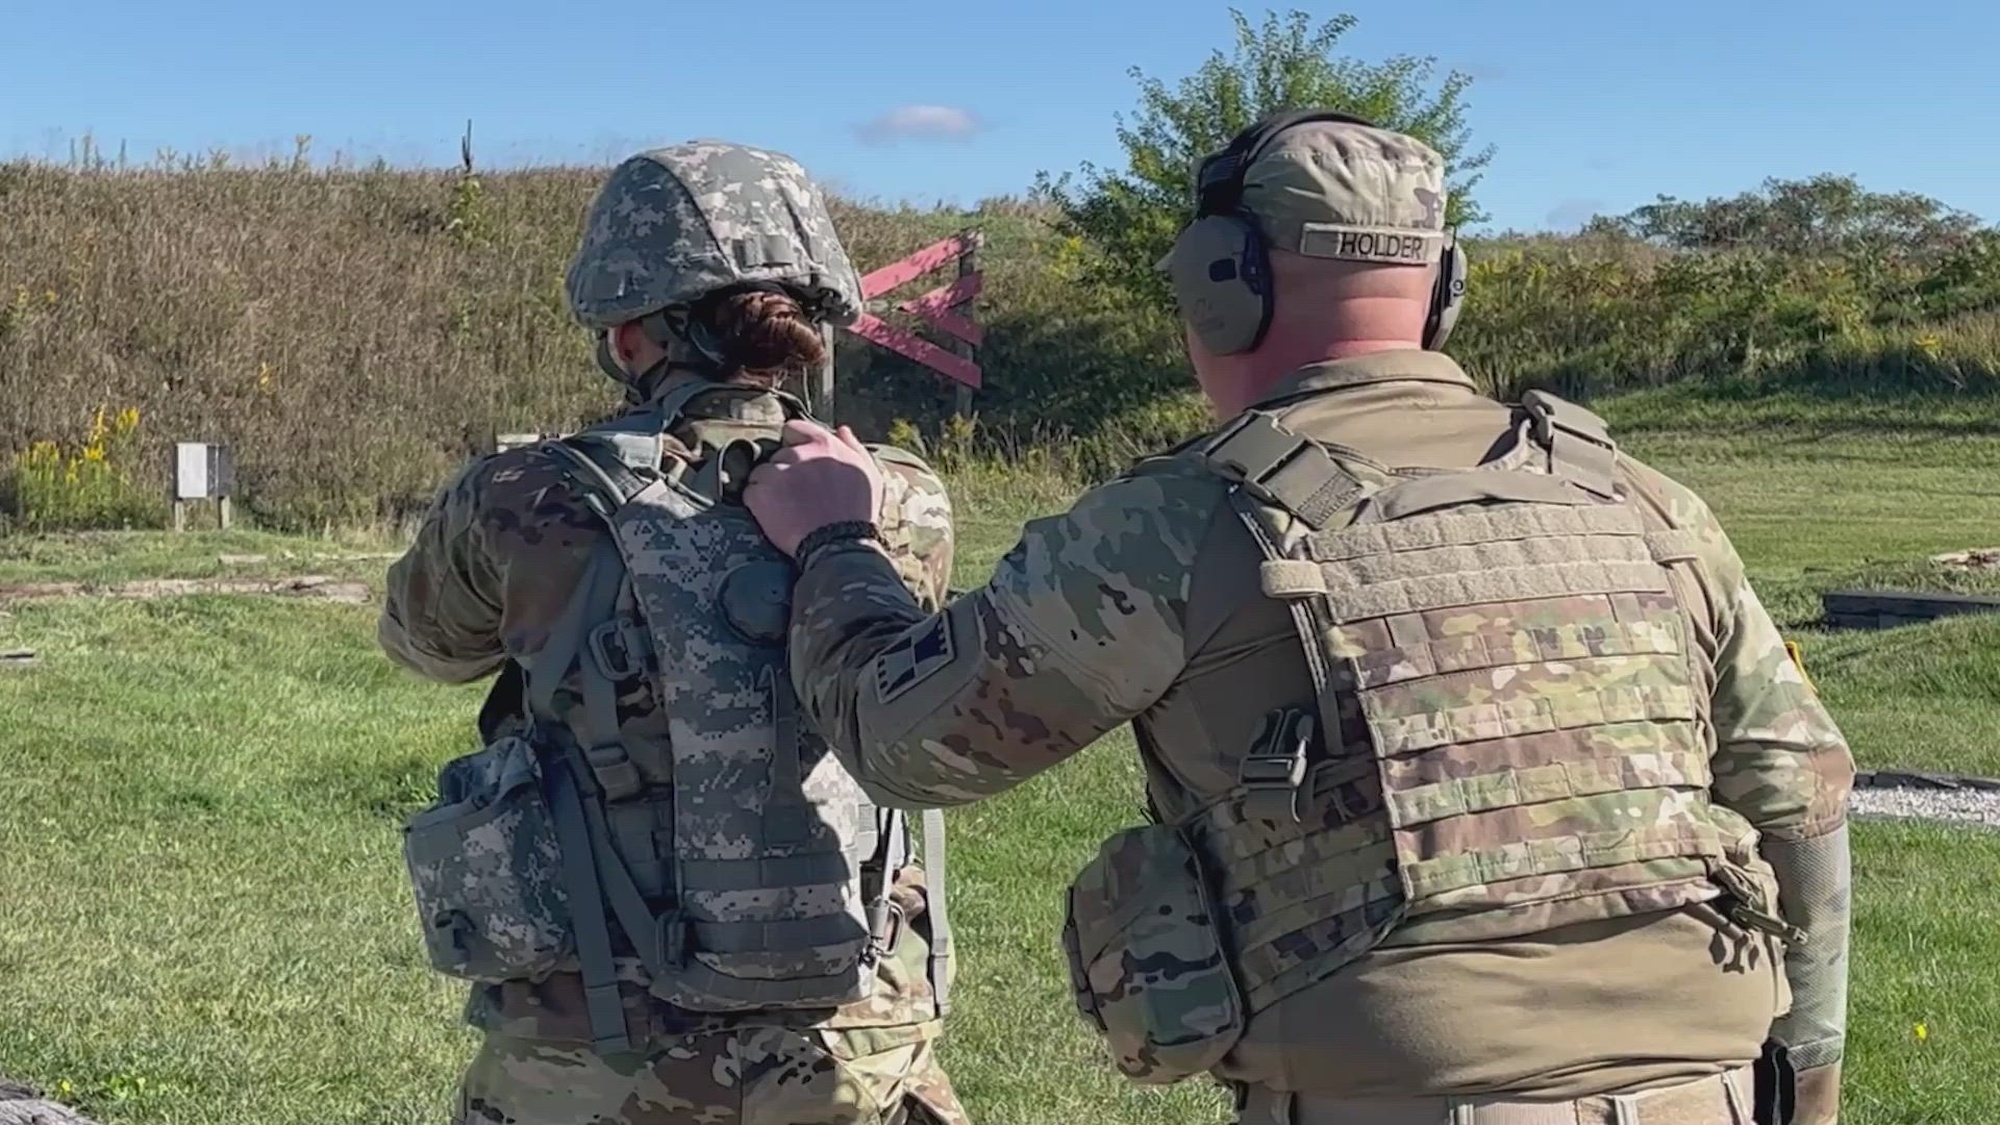 U.S. Army Reserve Soldiers assigned to the 85th U.S. Army Reserve Support Command partnered with the 416th Theater Engineer Command to conduct an individual weapons qualification on the 9mm pistol at Marseilles Training Center, September 22, 2022.